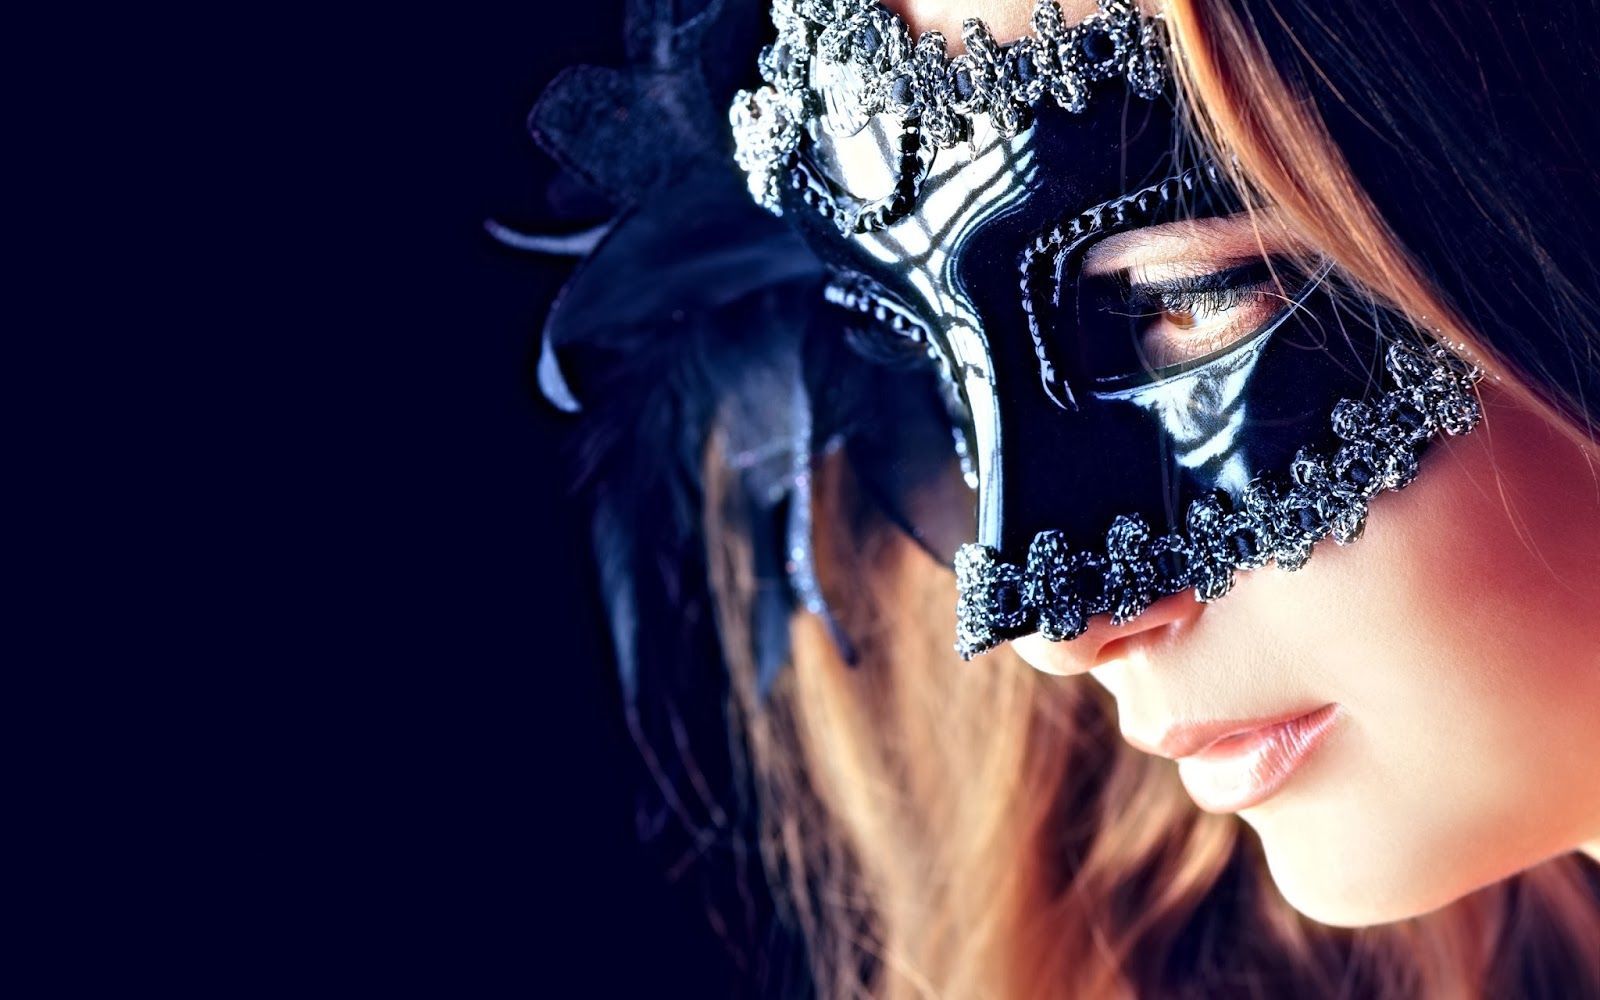 Girl With Black Mask HD Wallpaper. Mysterious girl, Black mask